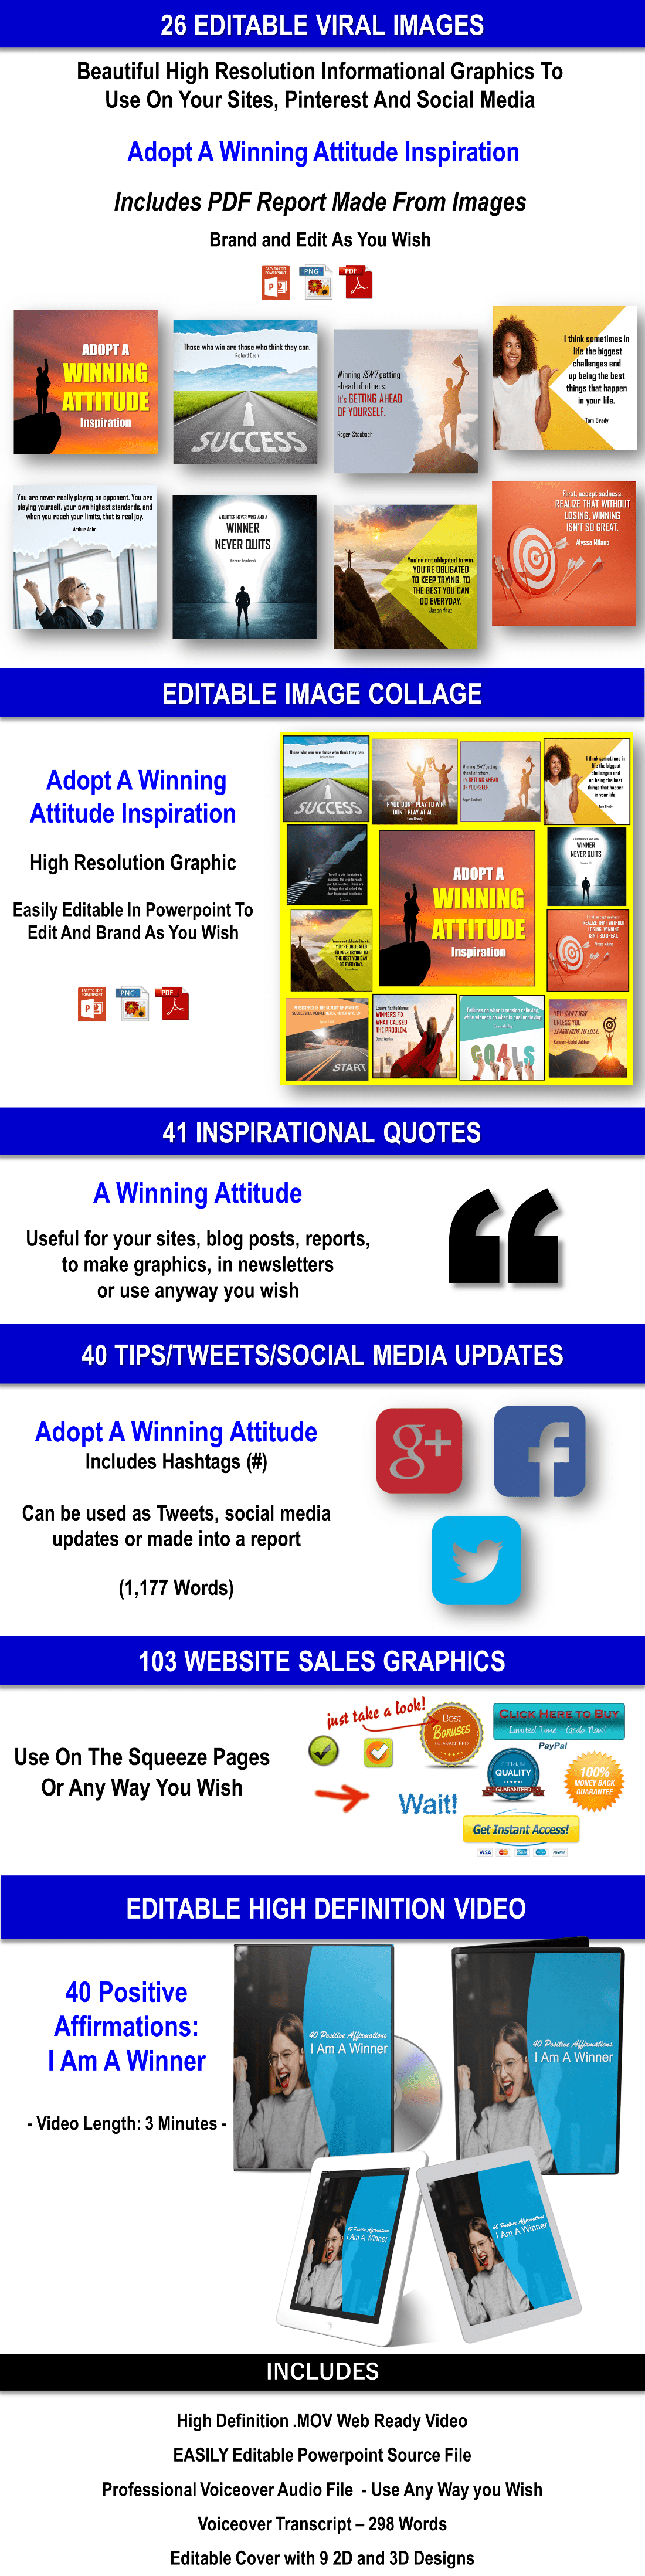 Adopt A Winning Attitude And Mindset Giant Motivational Content Pack PLR Rights